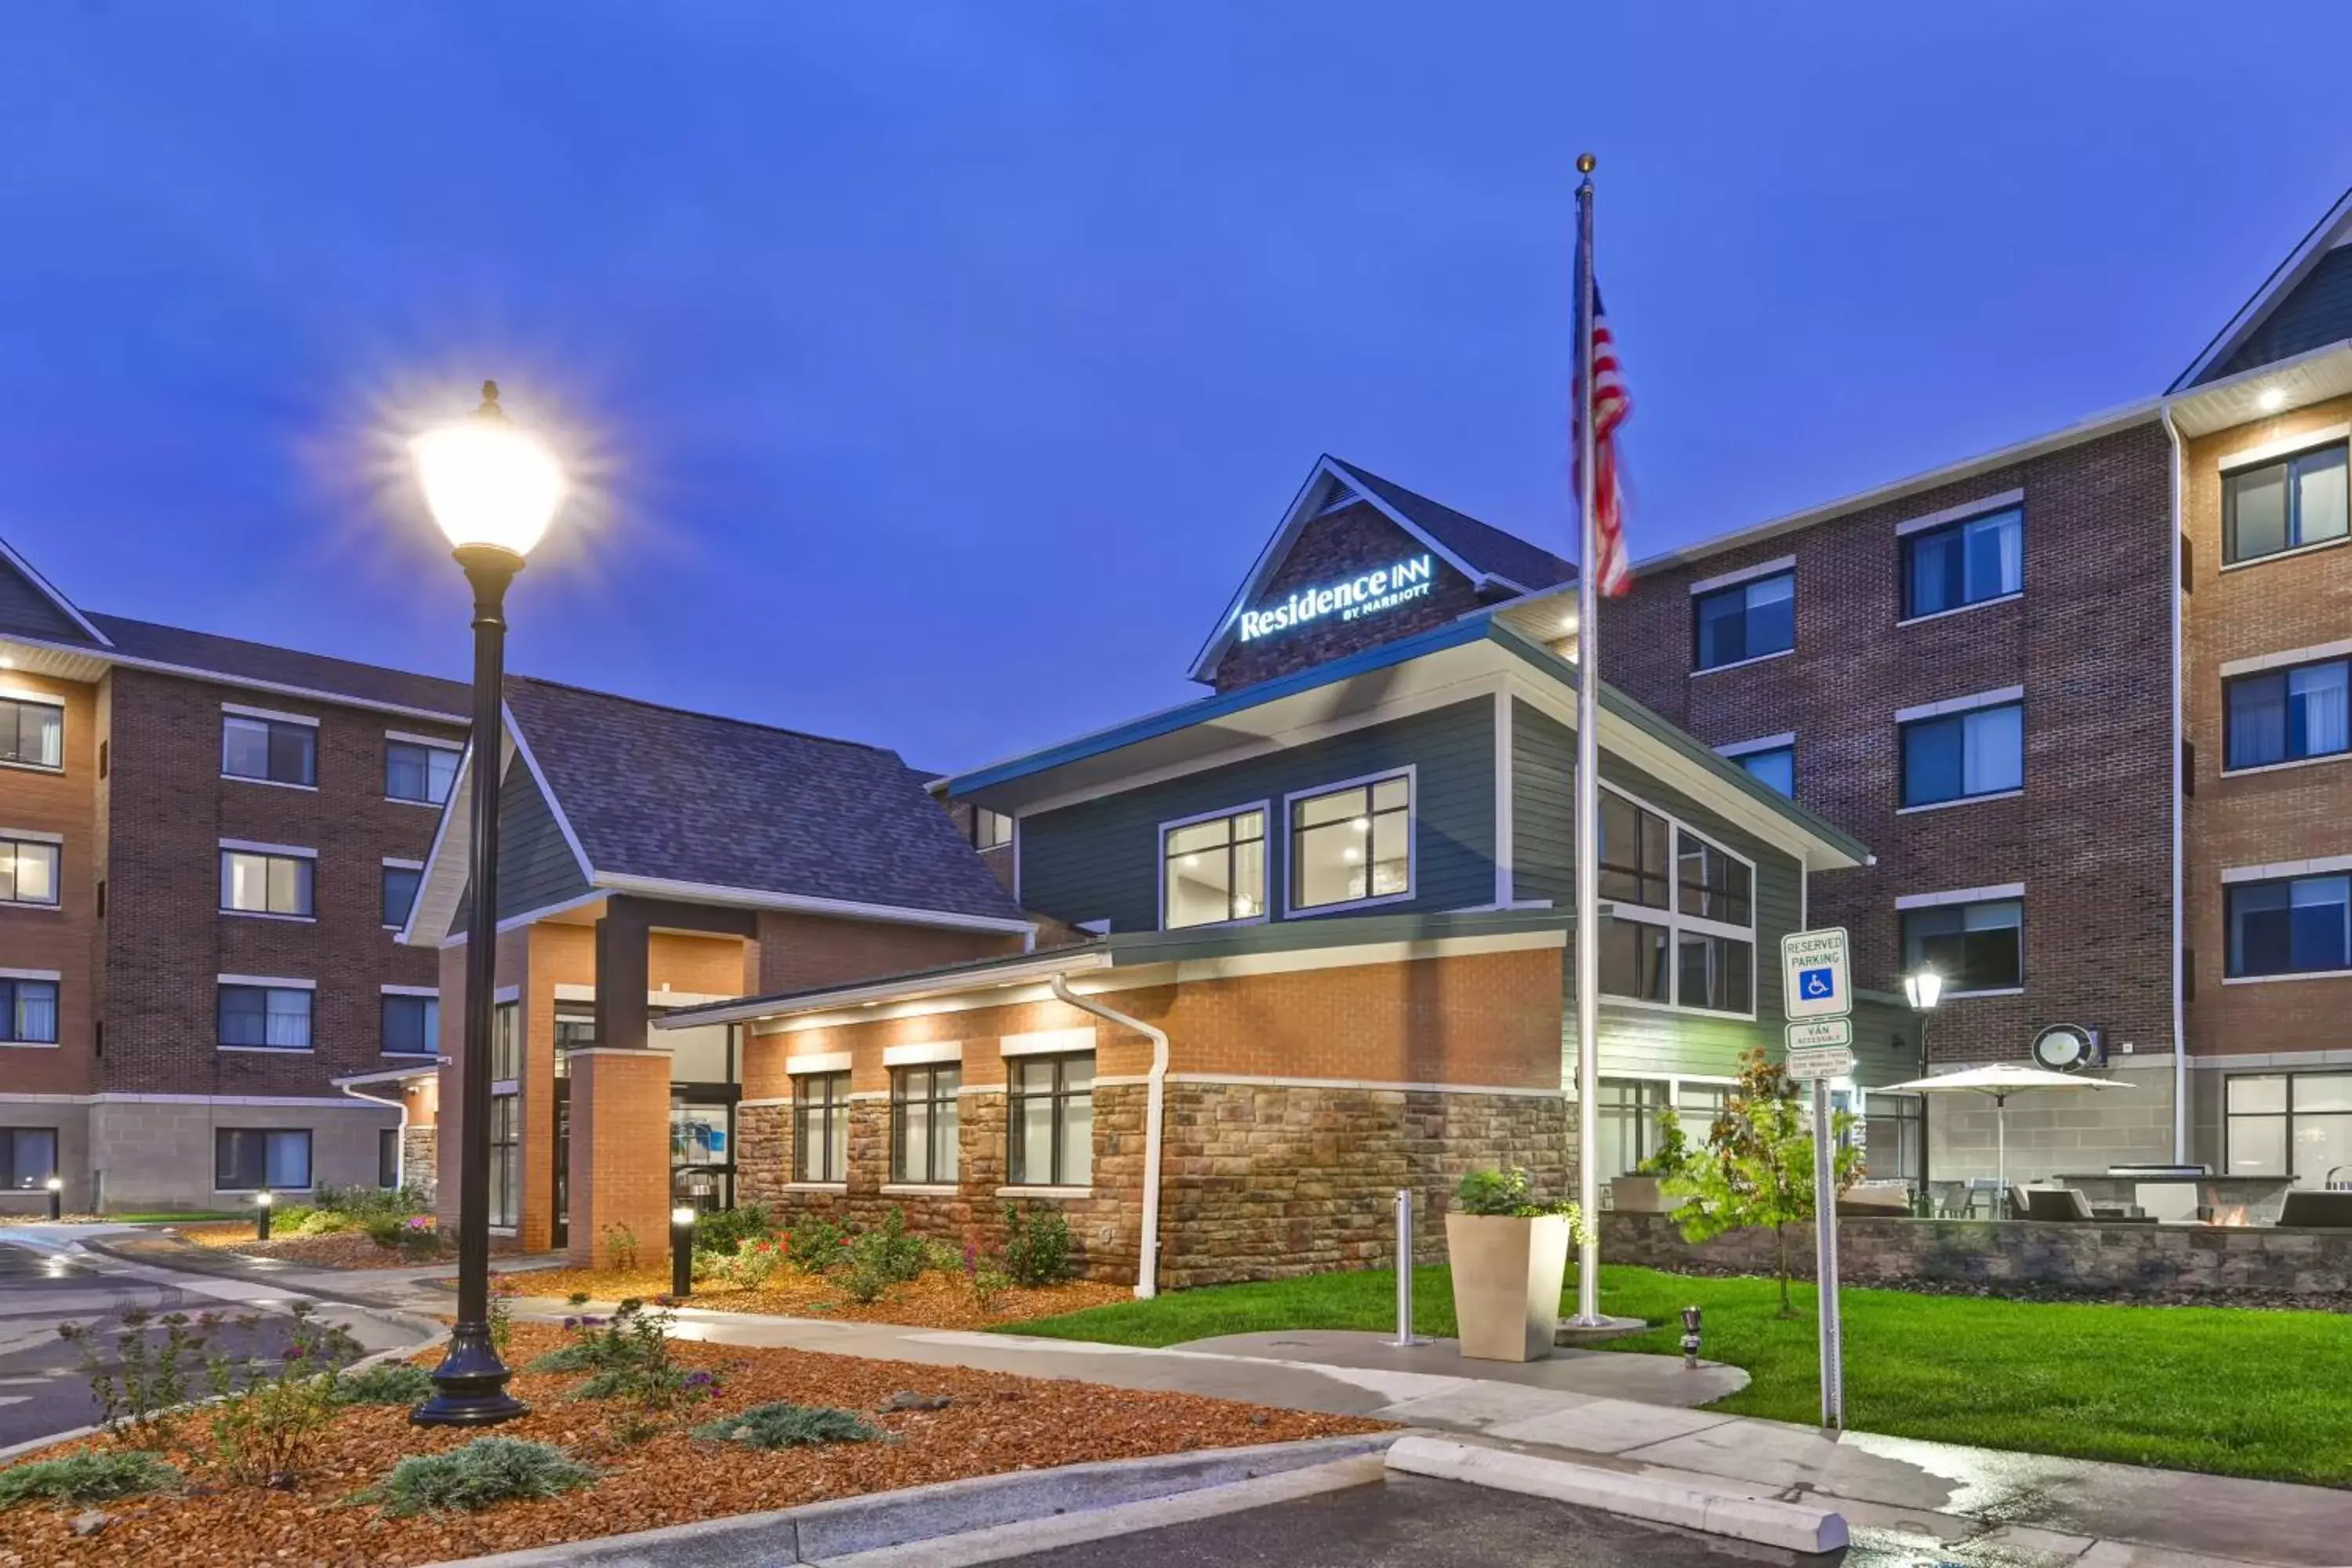 Property Building in Residence Inn by Marriott Cleveland Airport/Middleburg Heights